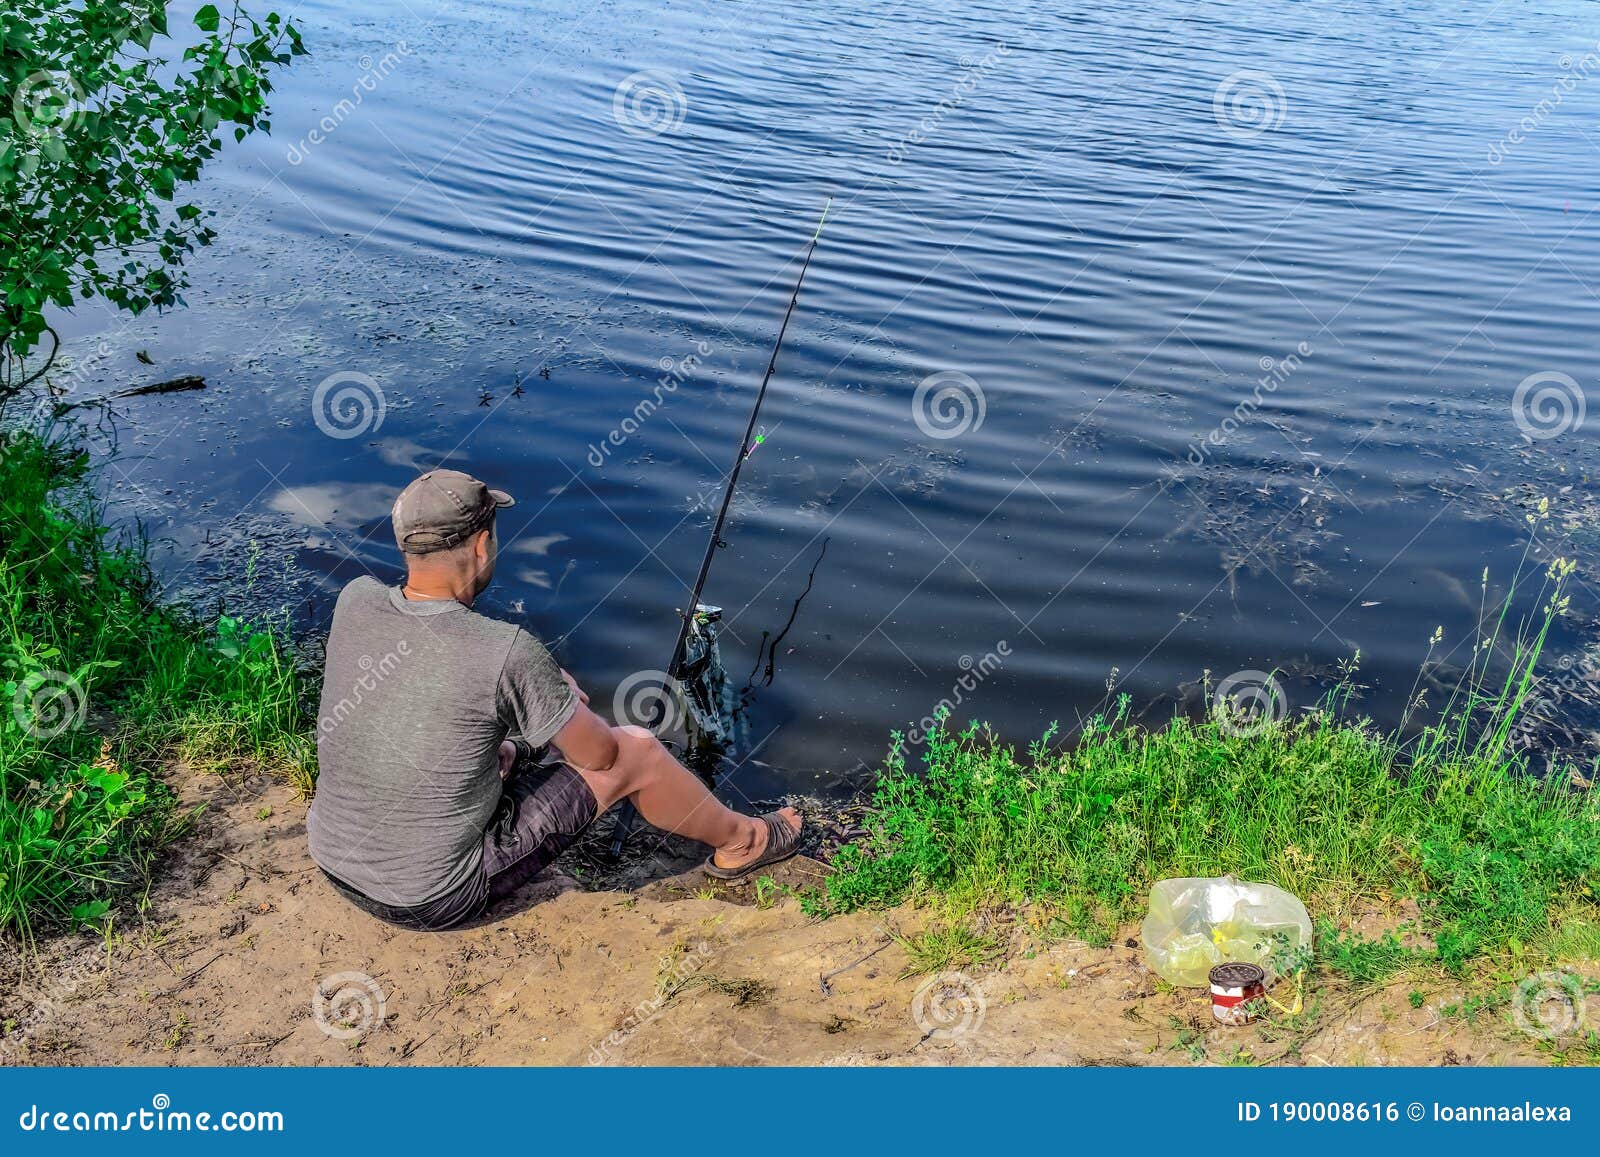 https://thumbs.dreamstime.com/z/fisherman-sitting-ground-fishing-pond-top-view-young-adult-man-rod-shore-background-blue-water-green-190008616.jpg